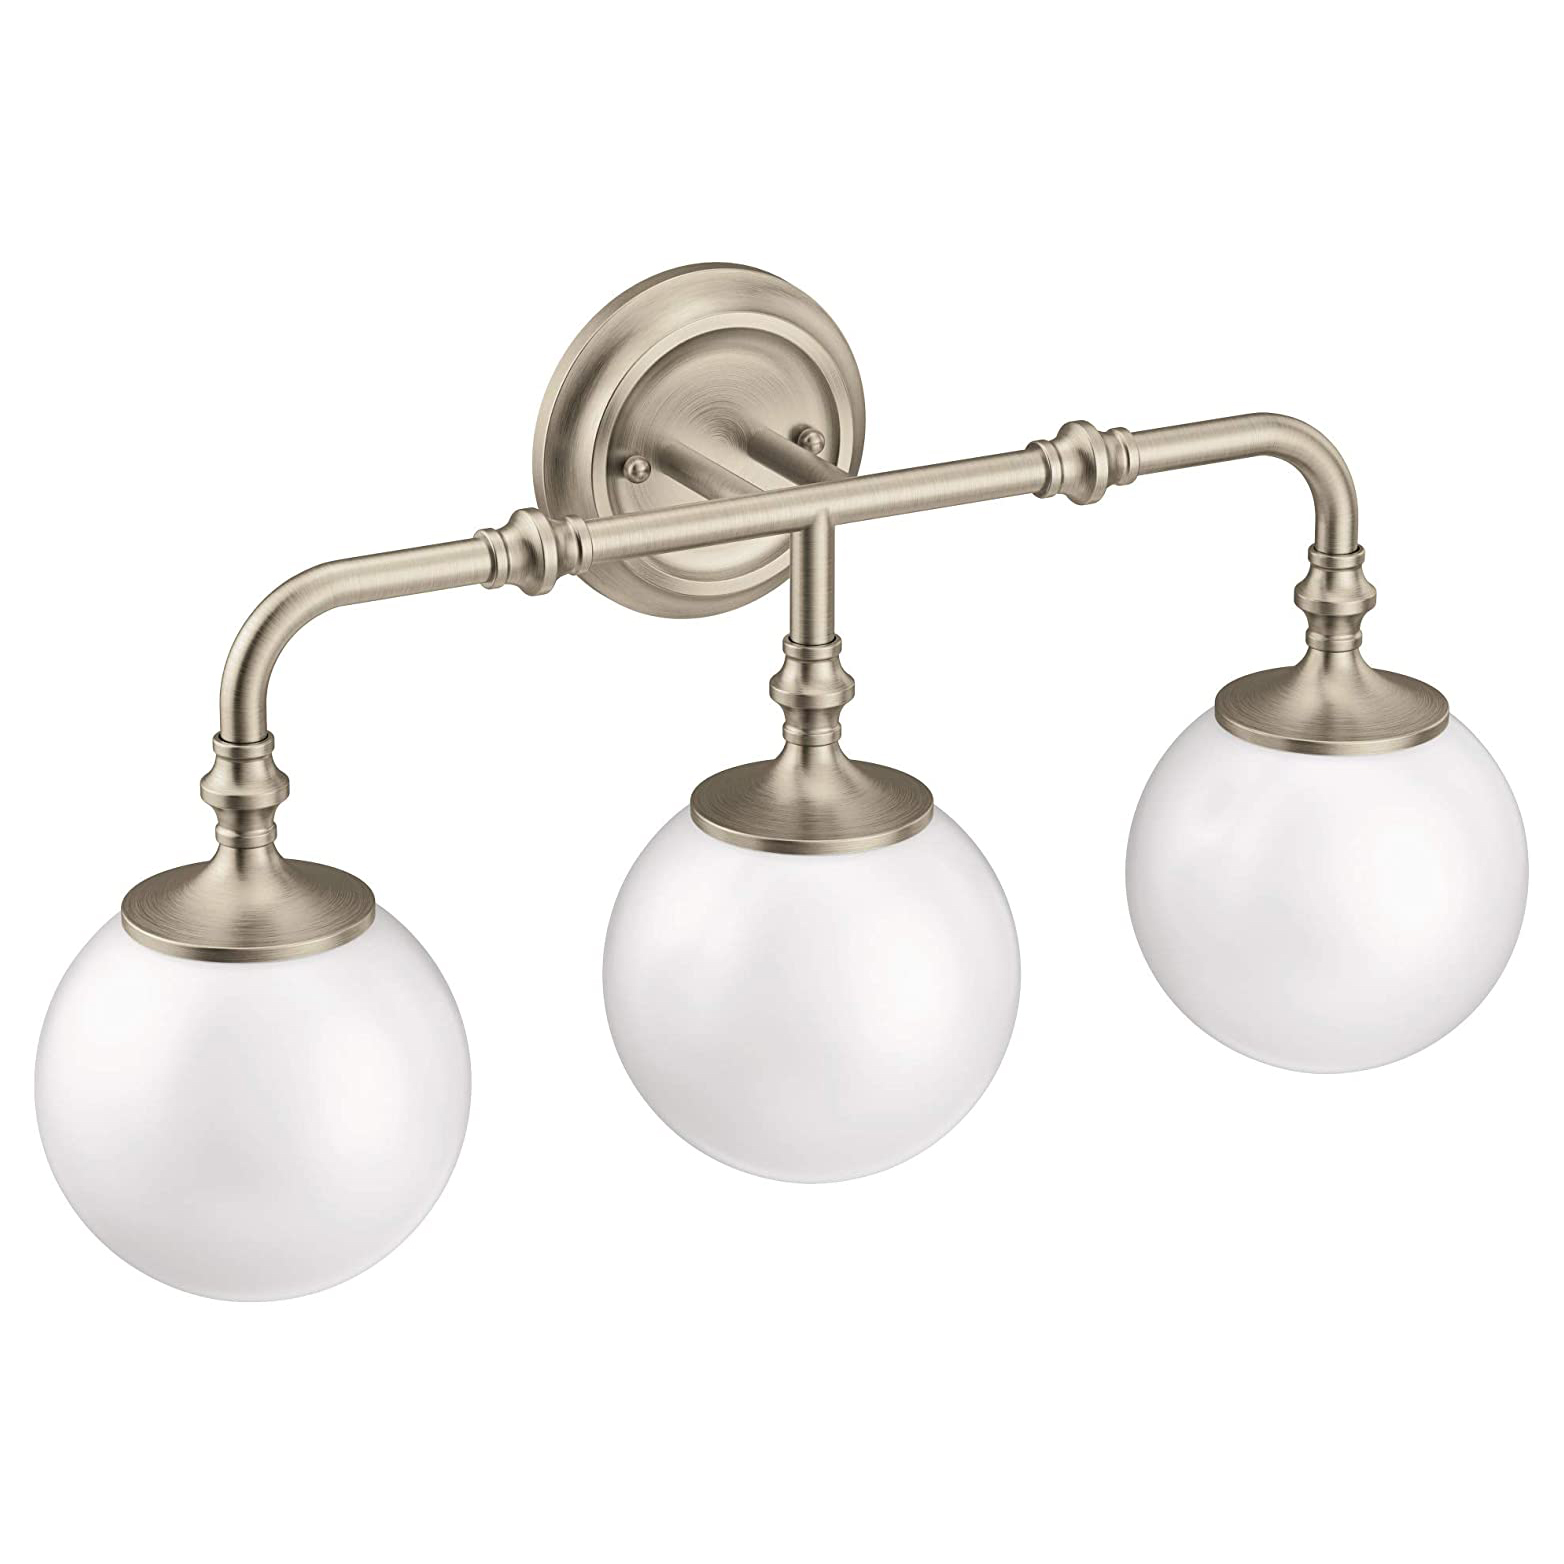 Colinet 3-Globe Light Fixture in Brushed Nickel